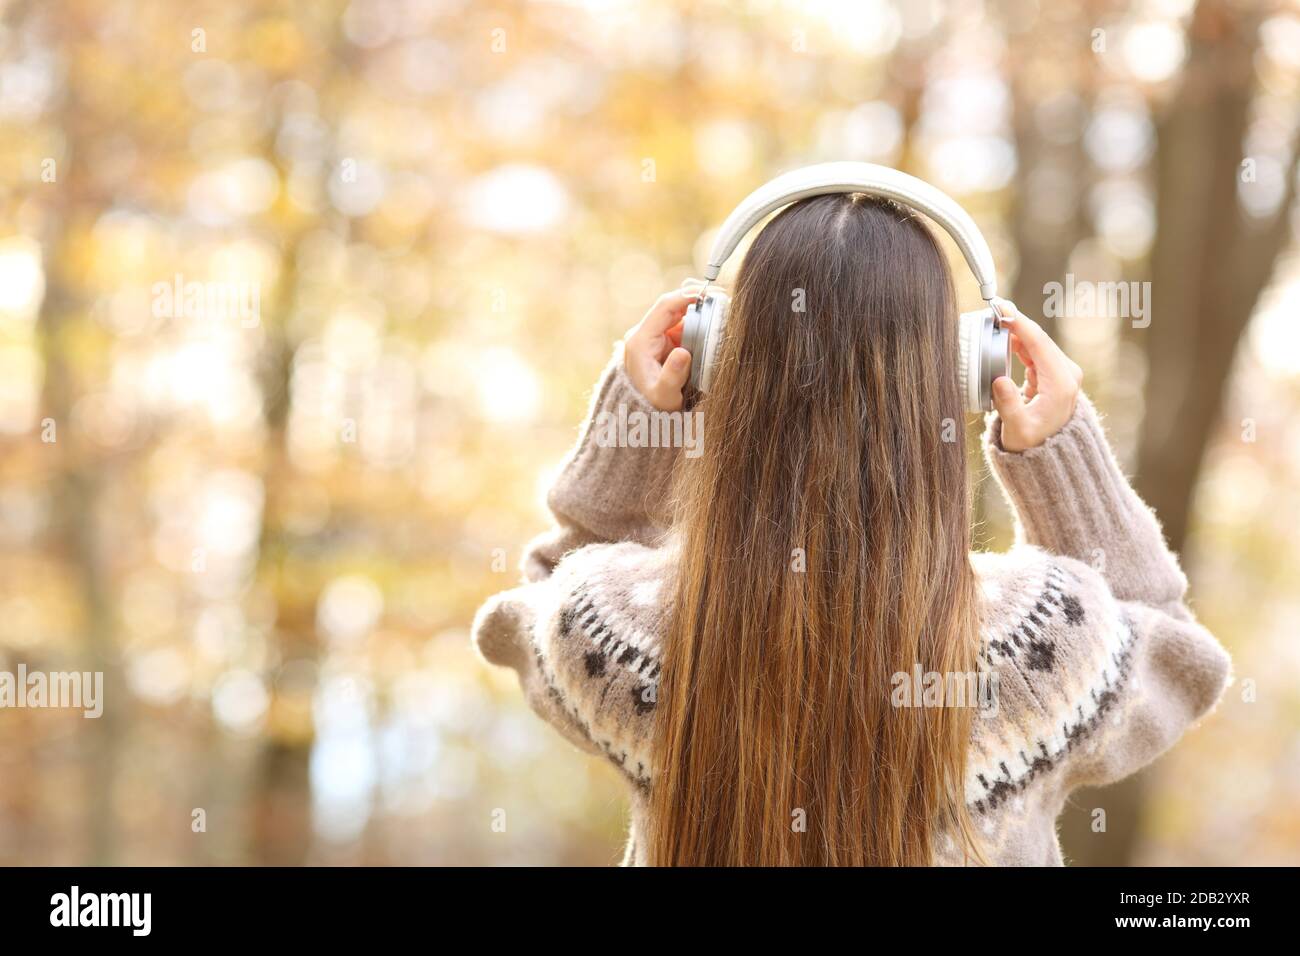 Back view portrait of woman putting headphones in autumn in a park Stock Photo